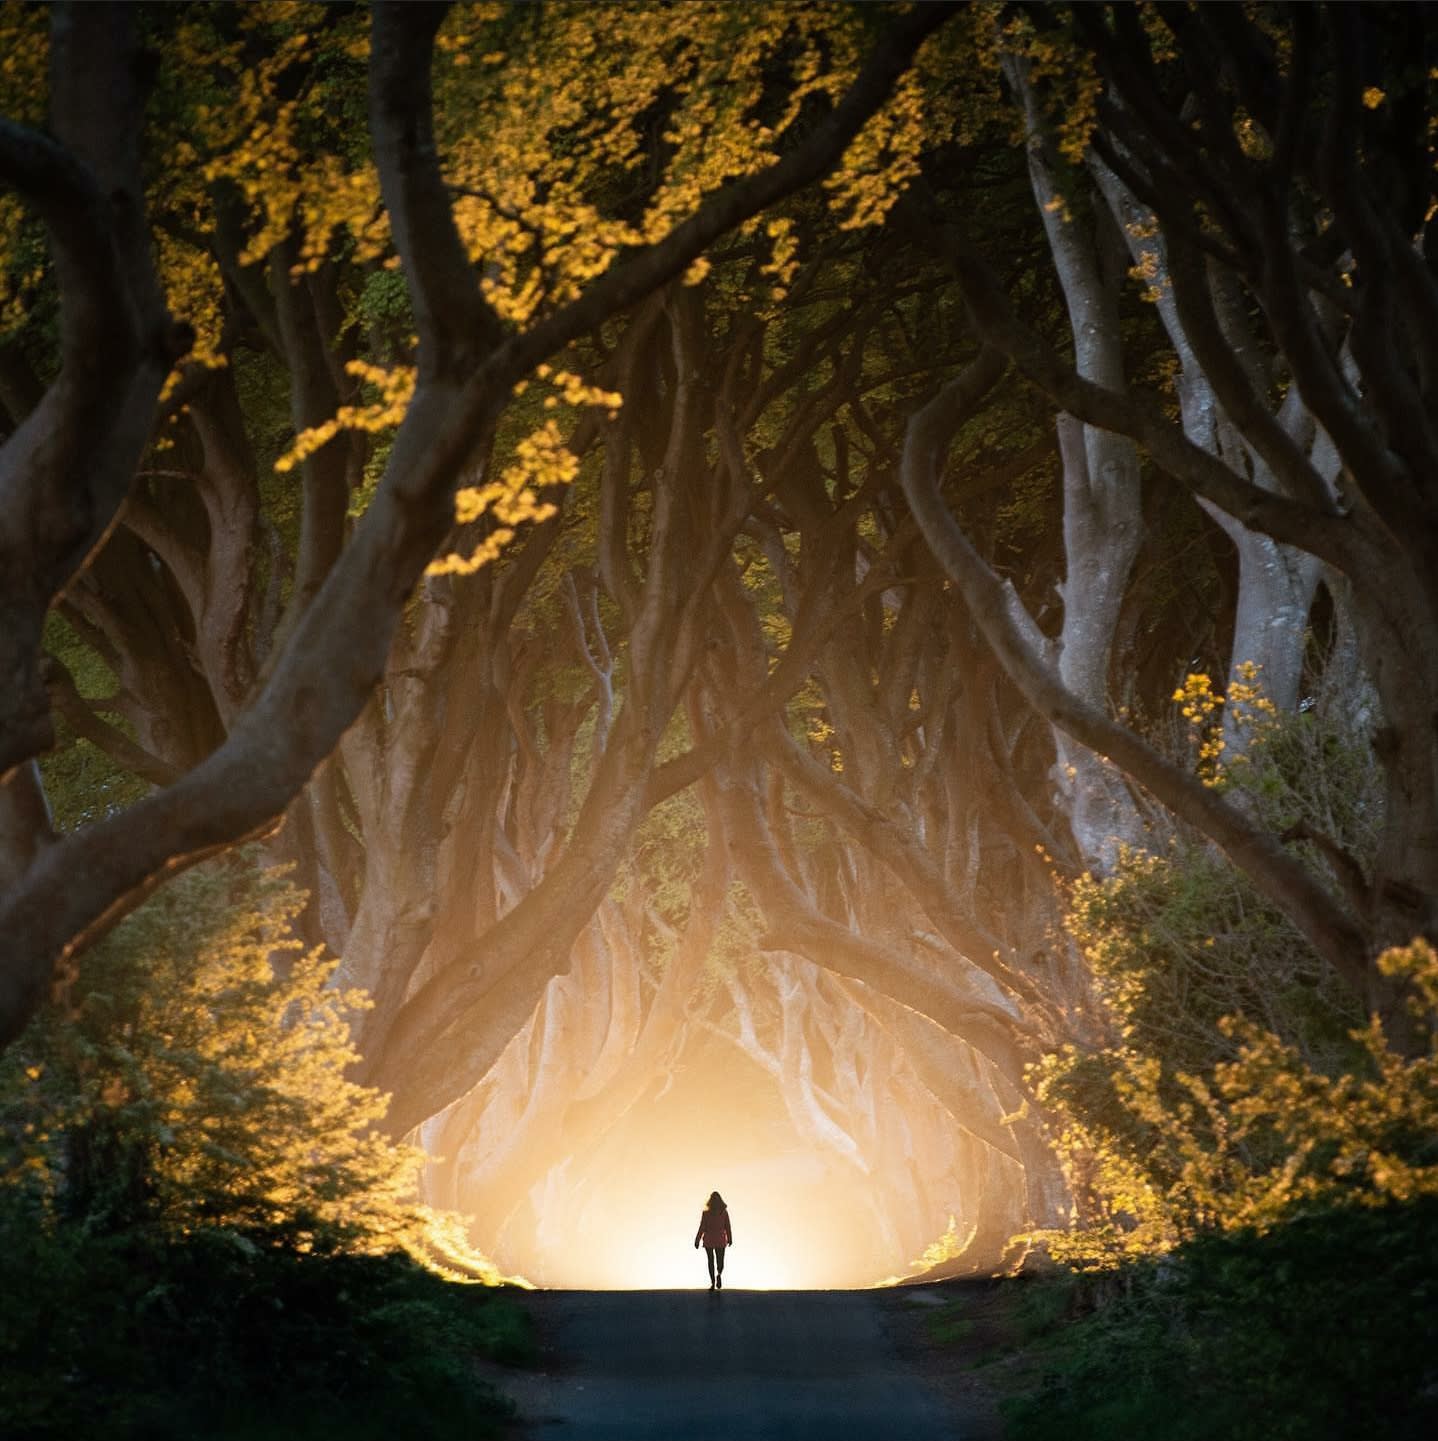 The Dark Hedges in Northern Ireland. Lights from a distant car gives this amazing effect at night time.